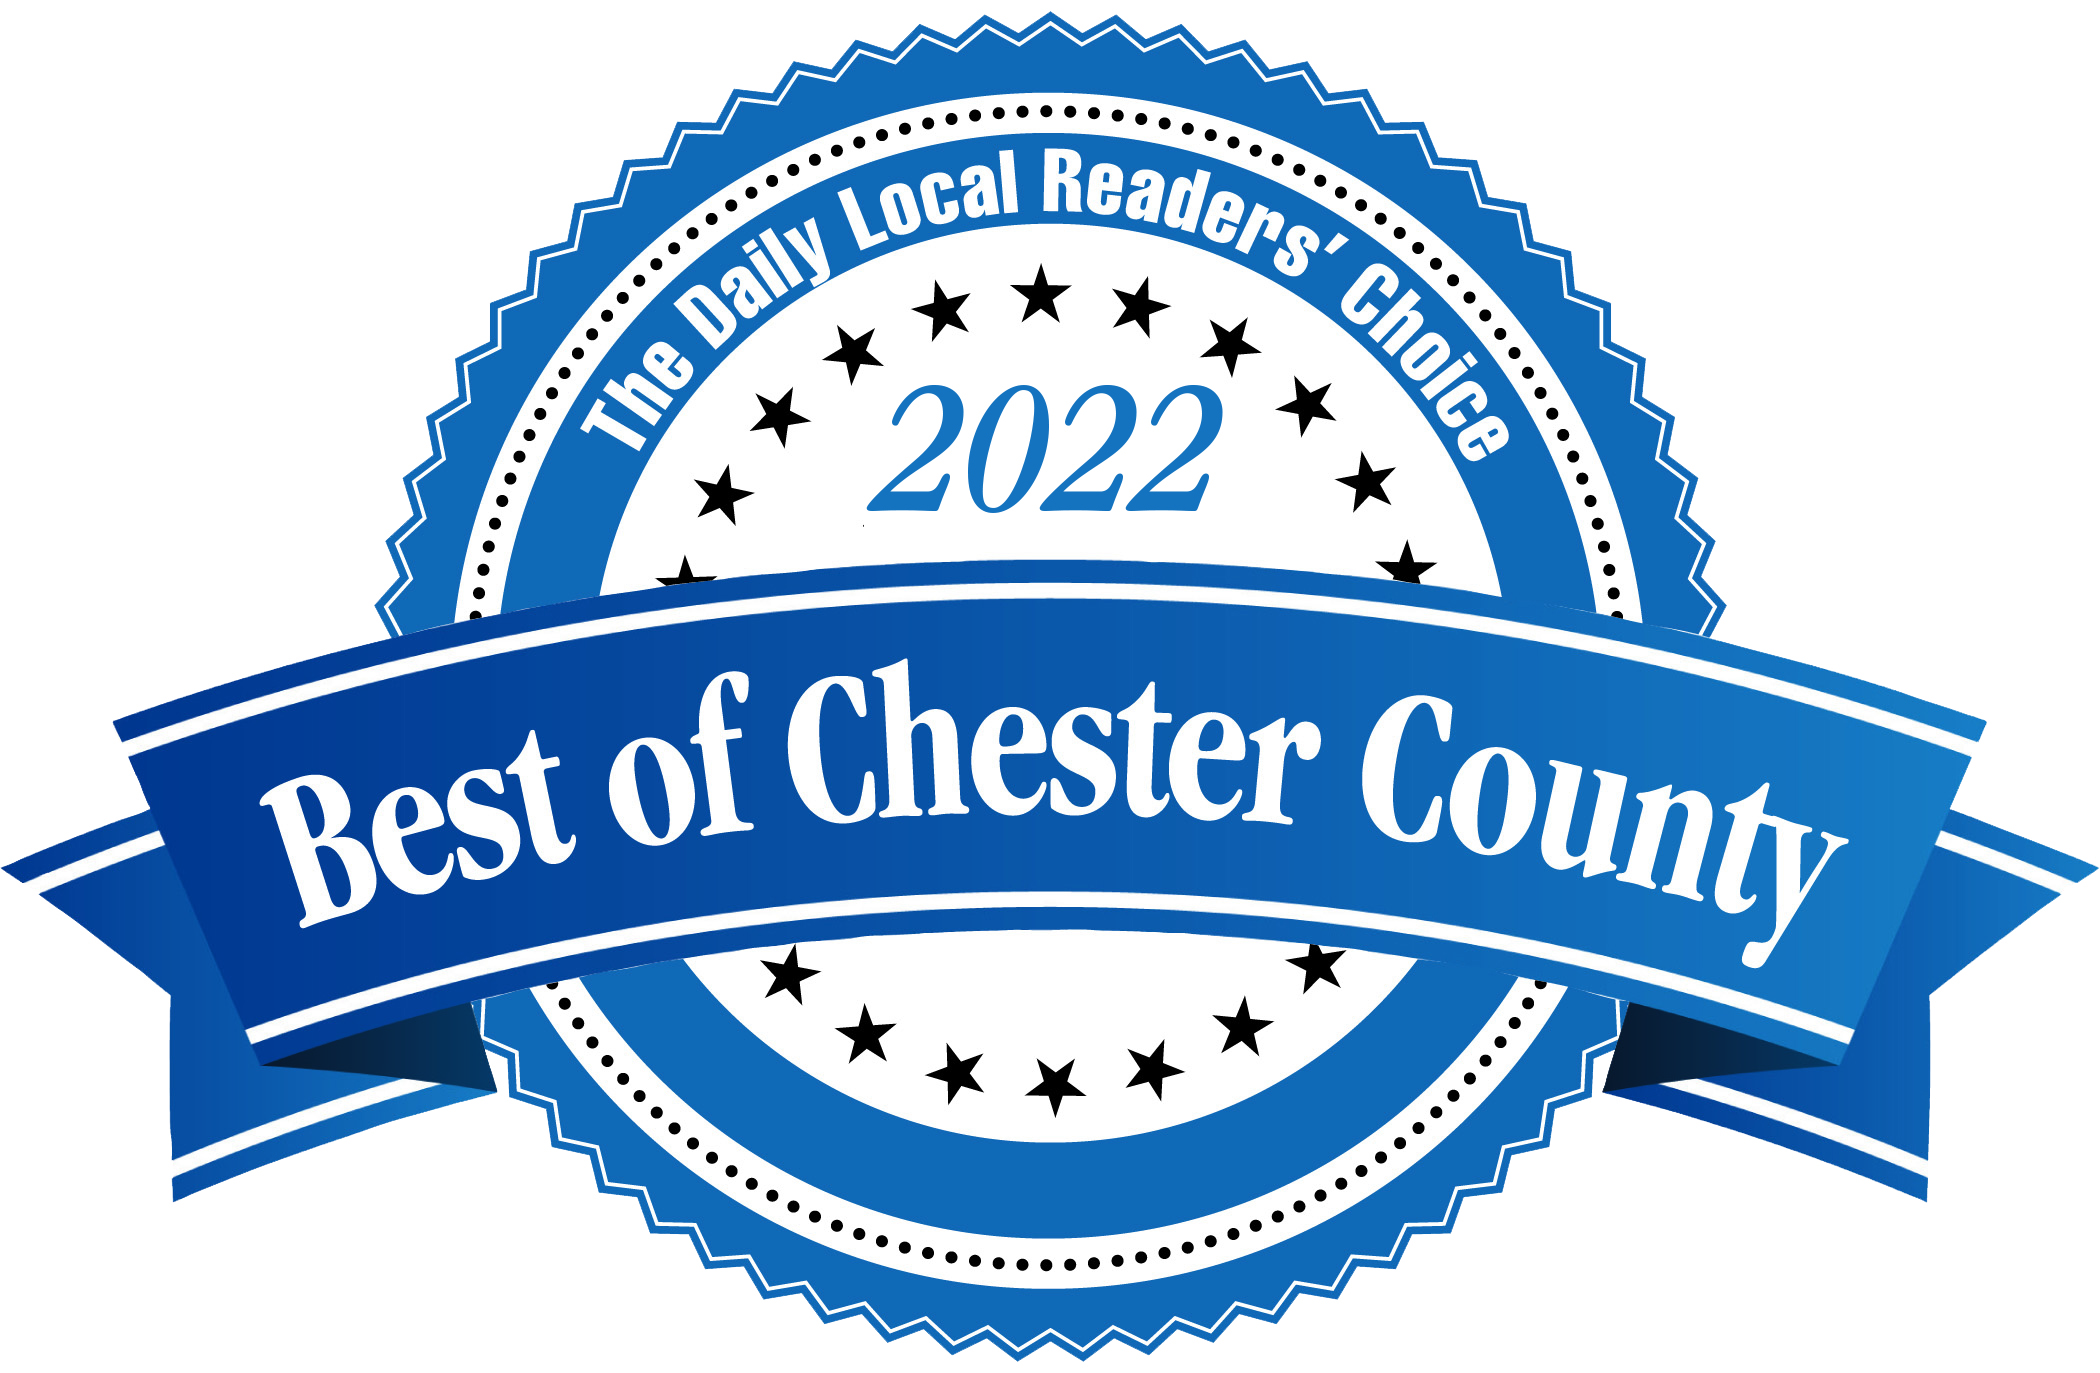 Best of Chester county 2022 logo